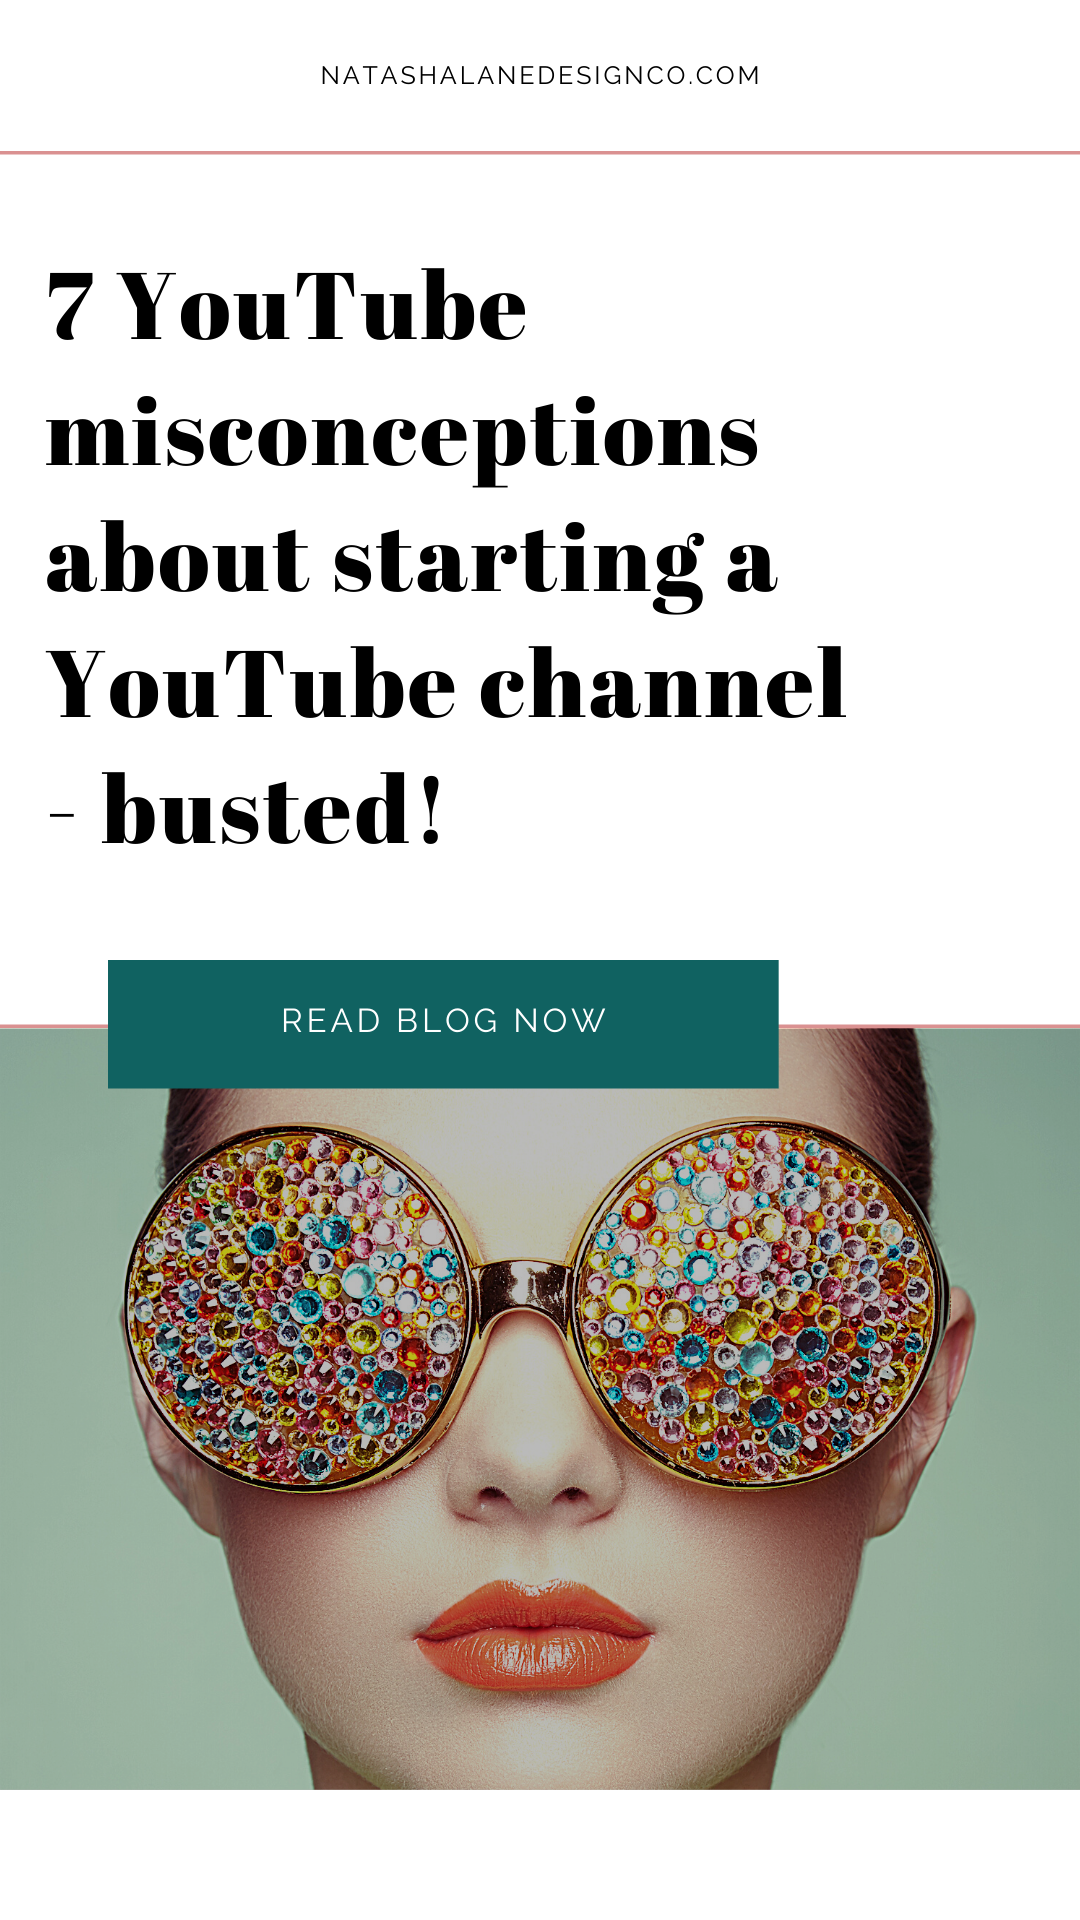 7 YouTube misconceptions about starting a YouTube channel - busted! (5)